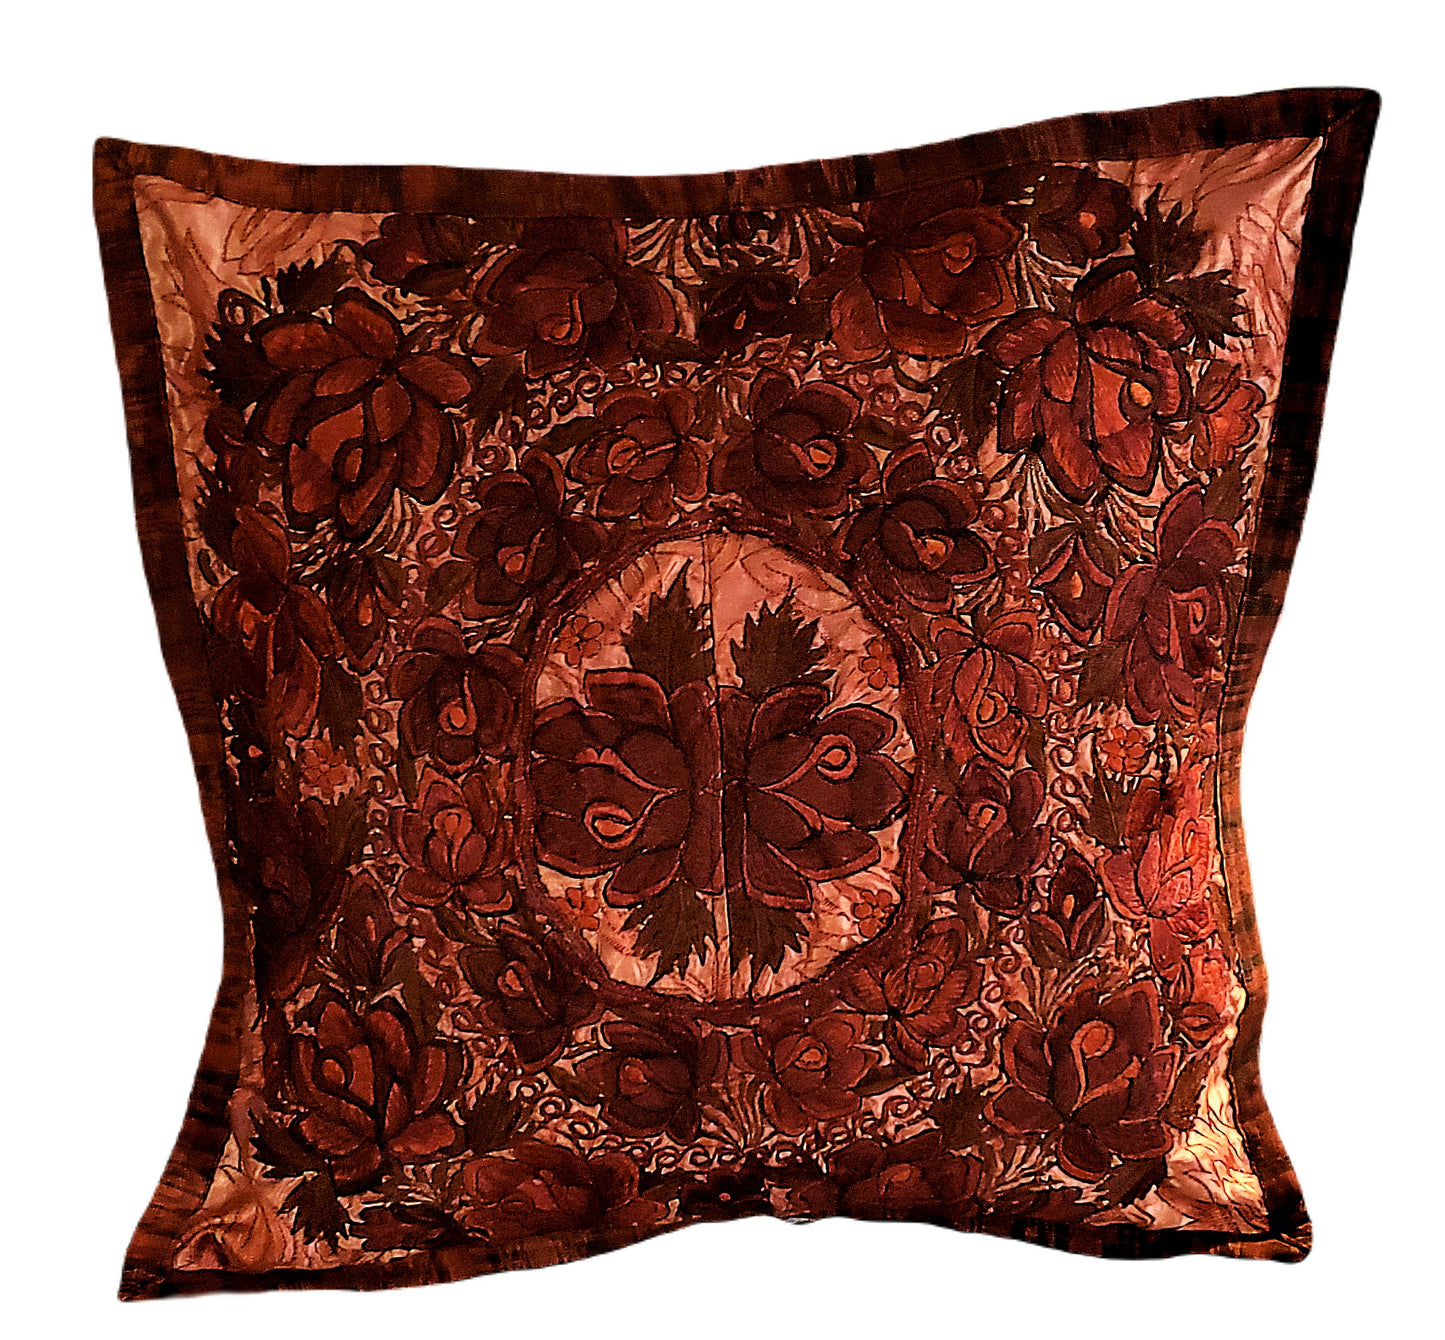 Handmade Rust/Red/Terracotta Embroidered Guatemalan Throw Pillow Cover